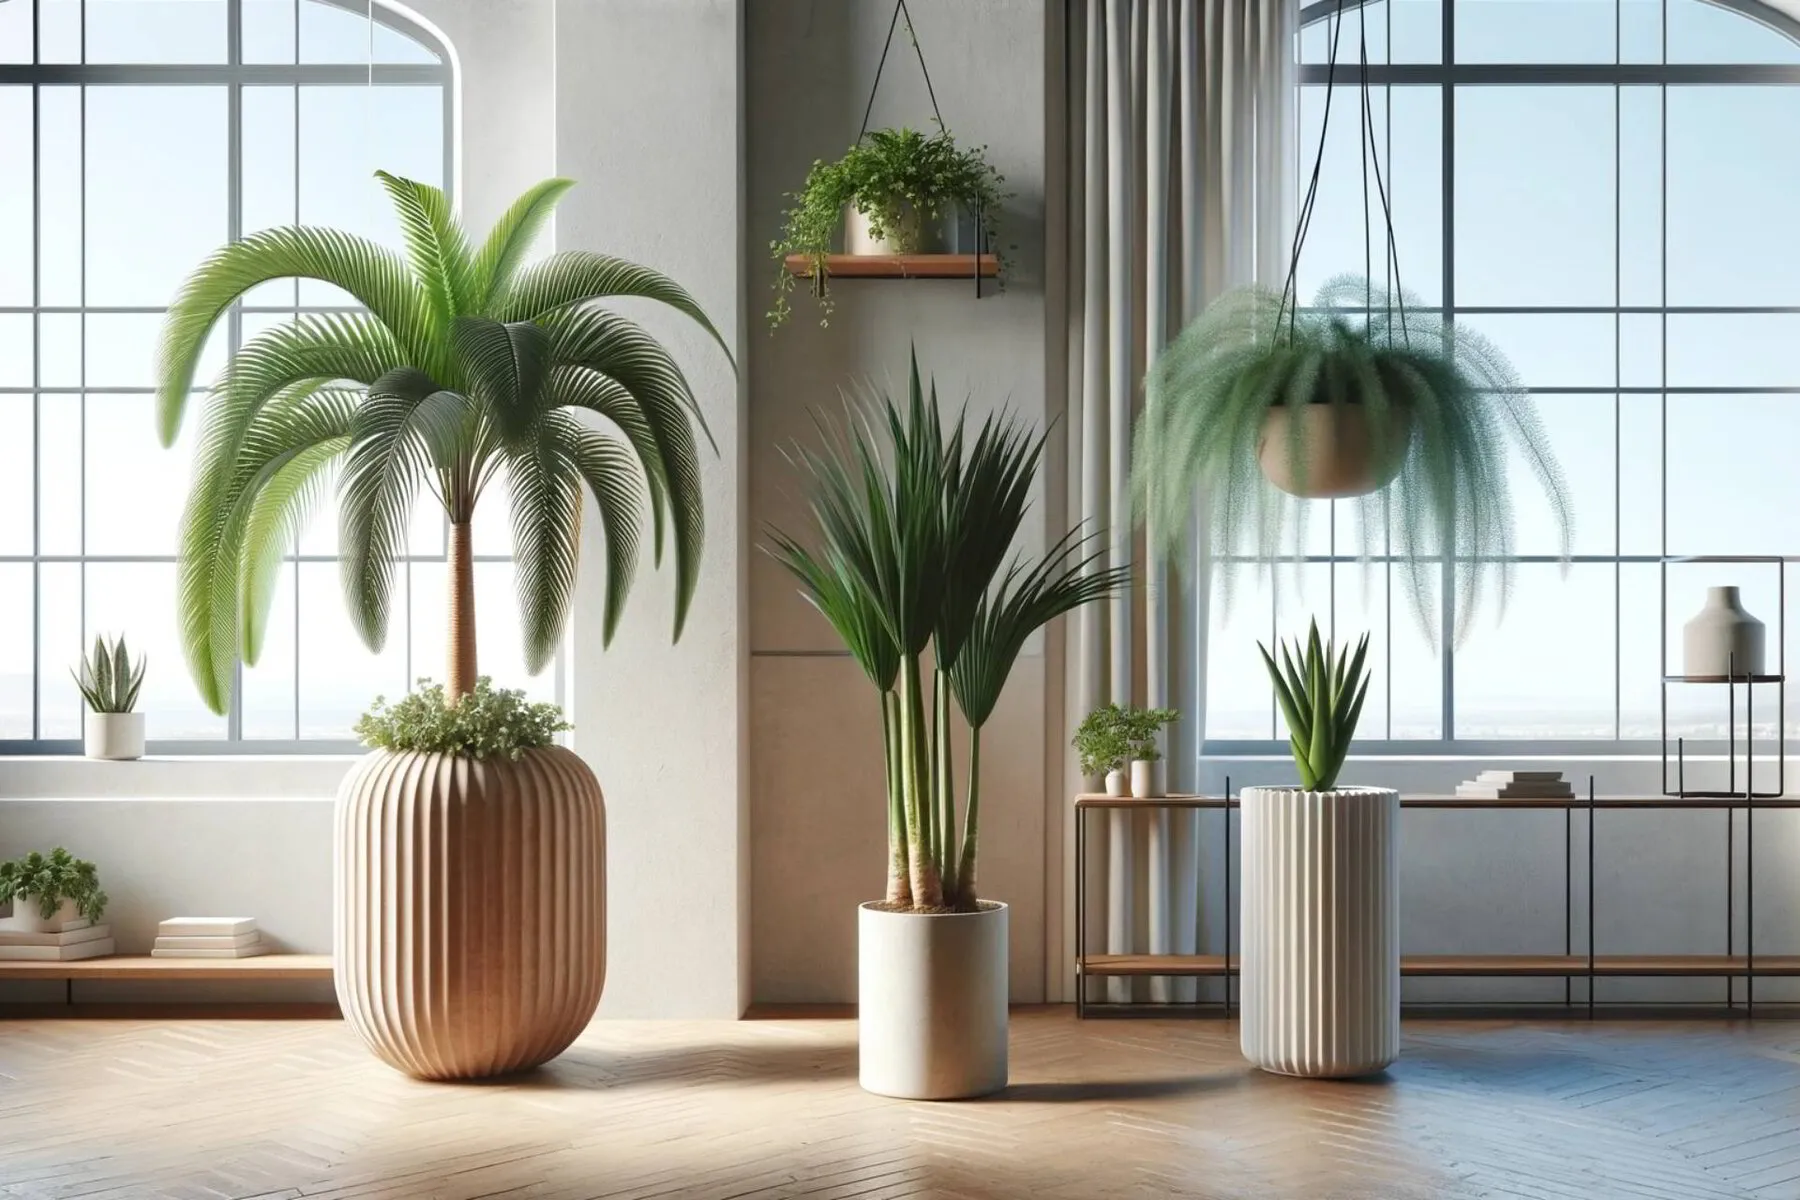 Modern home interior featuring, from left to right, a Ponytail Palm, a Yucca, and an Asparagus Fern